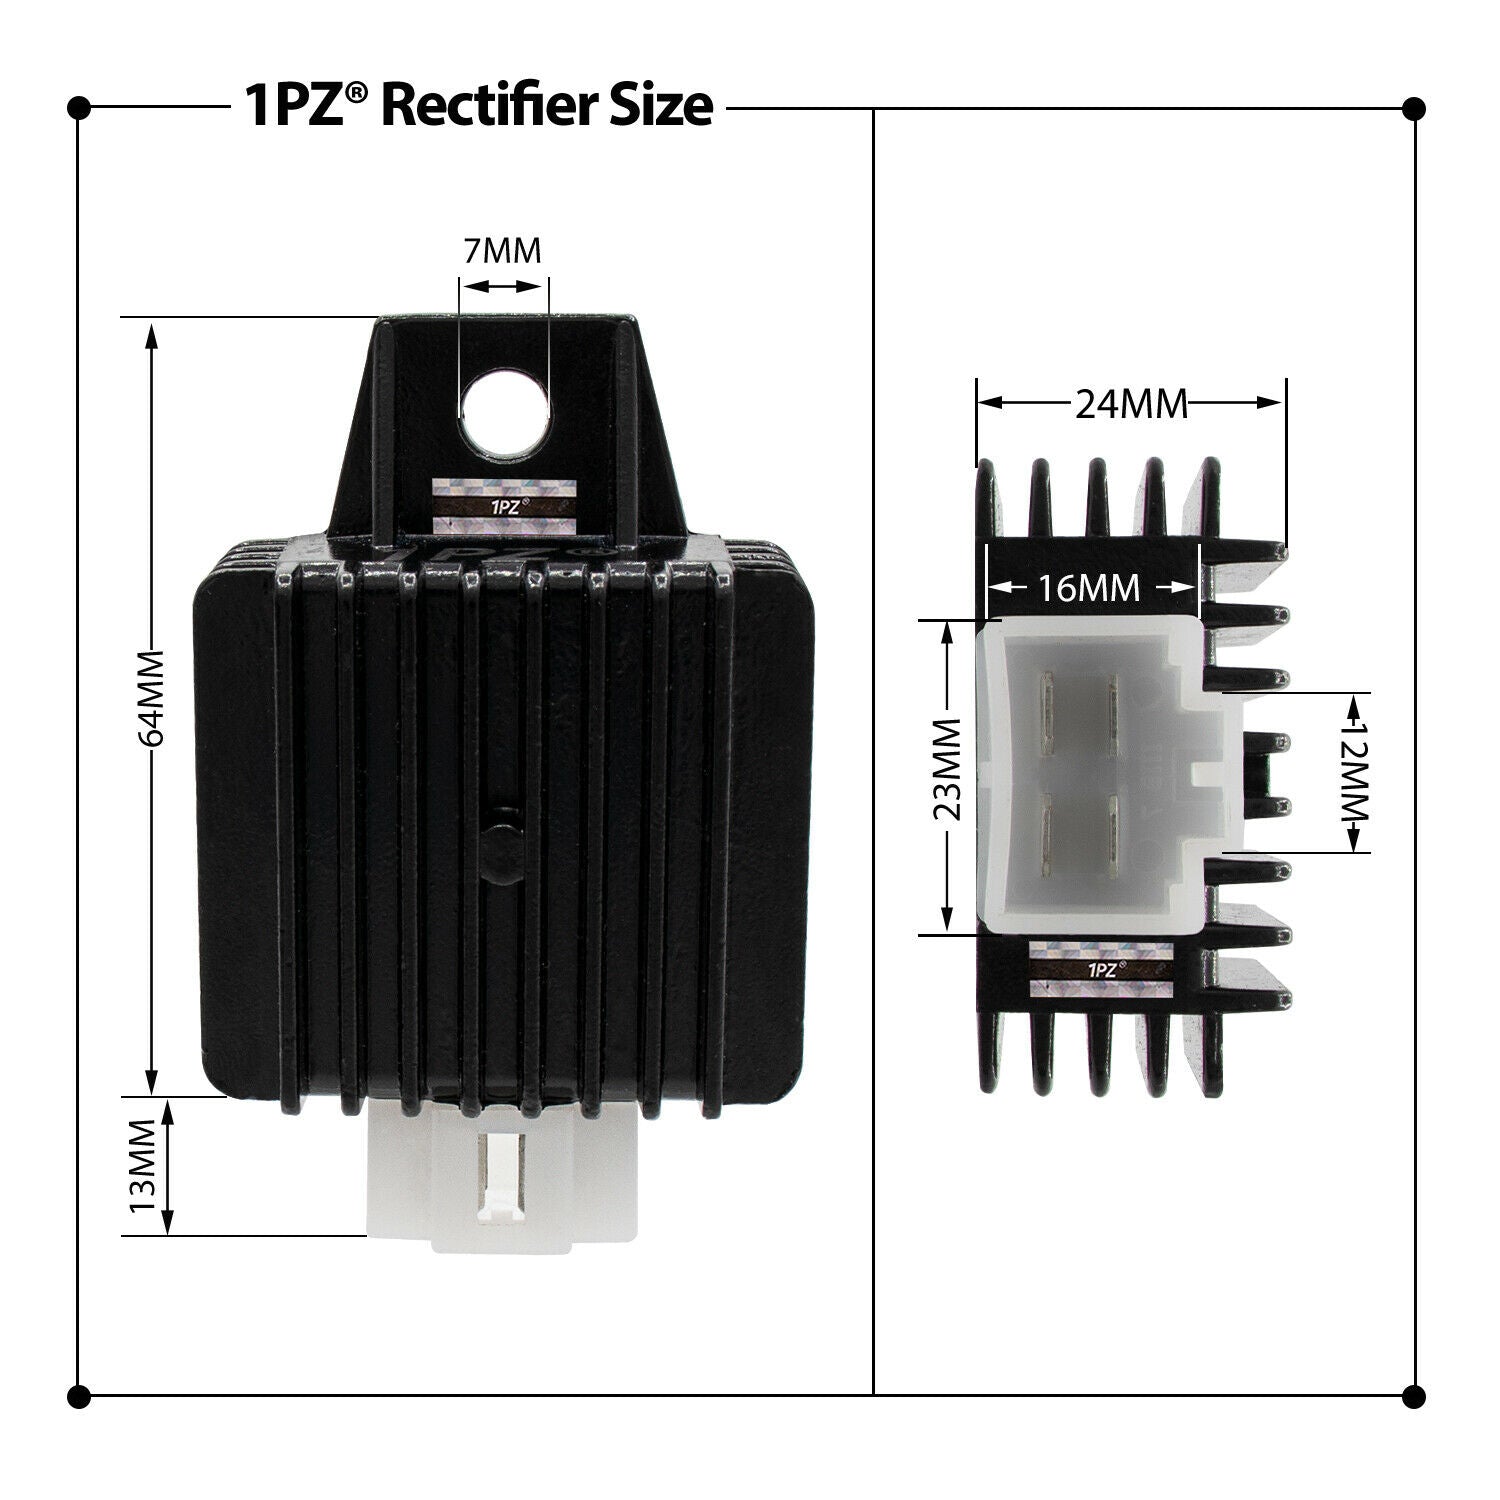 1PZ 4-Pin 12V Full-wave Motorcycle Regulator Rectifier for 50cc 70cc 90cc 110cc 125cc 150cc GY6 Engine Moped Scooter ATV